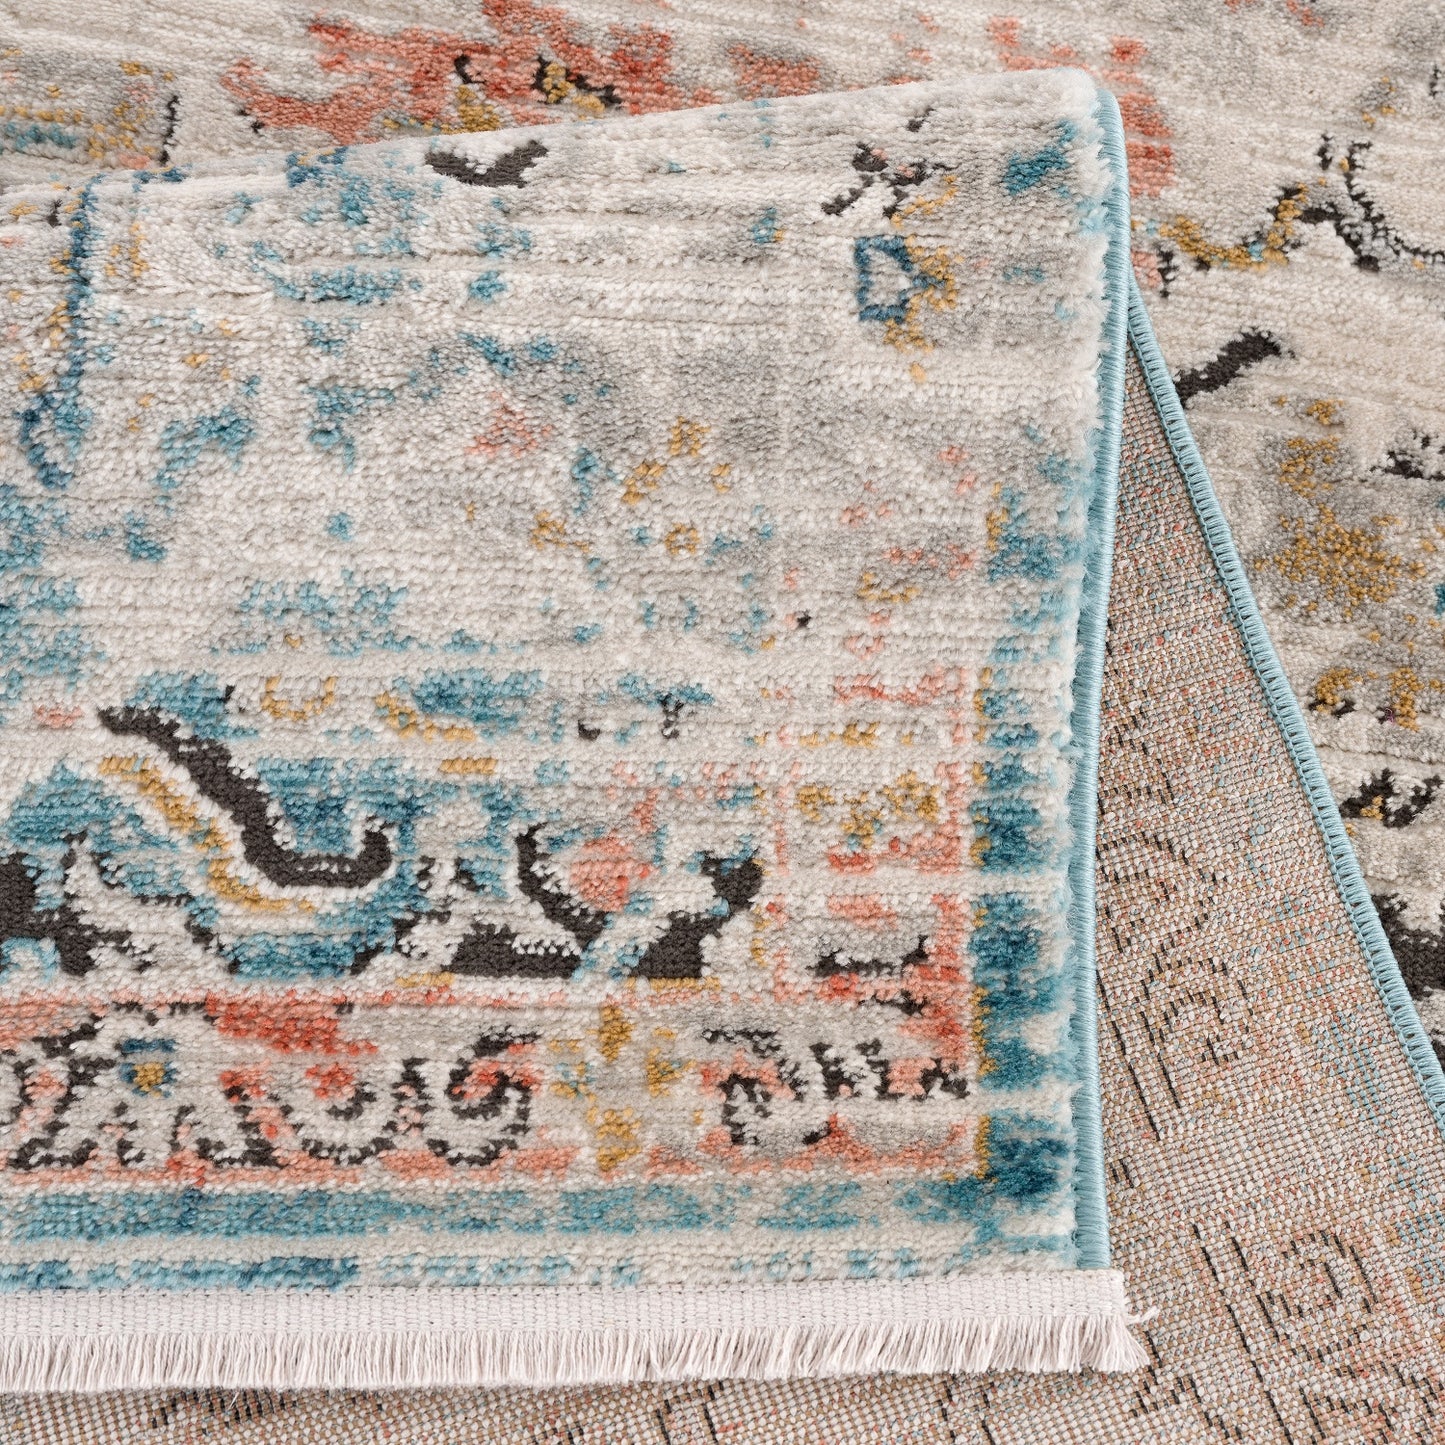 La Dole Rugs Traditional Persian Oriental Paisly Ivory Grey Teal Turquoise Red Orange Area Rug